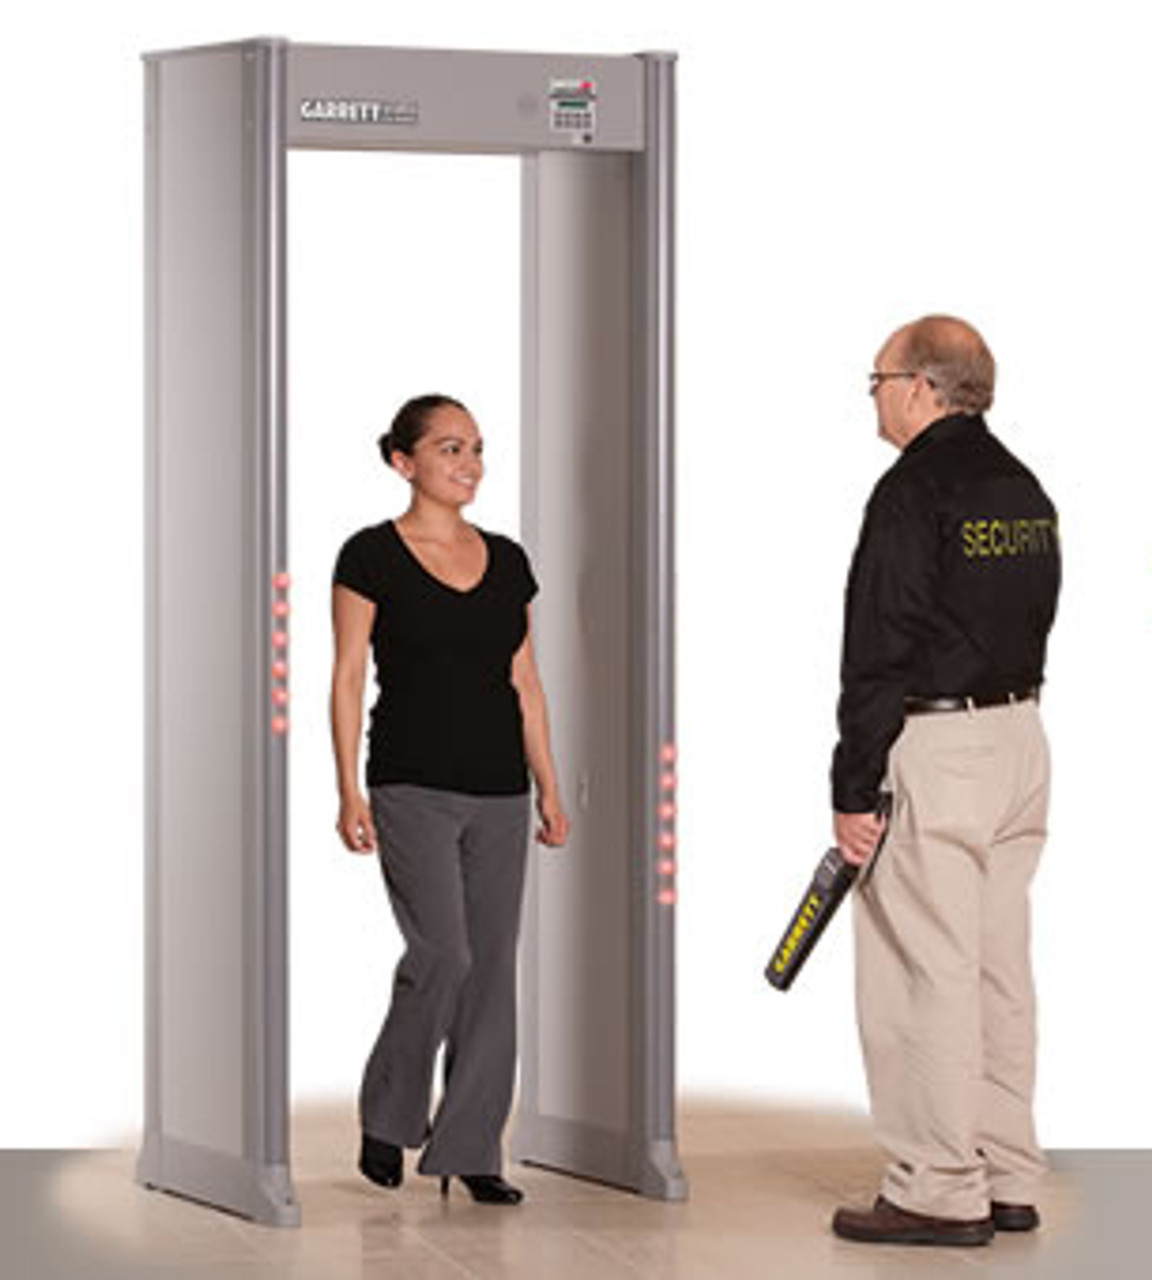 Garrett PD-6500i Walk-Through Metal Detector Package includes: Hand-Held Super-Scanner V, 14 A-H Lithium MZ Backup Battery, Wheels, Wireless Sync to Operate Multiple Systems, 3 Yr Warranty; for Security, Airports, Arenas, Sporting Events, Courthouses